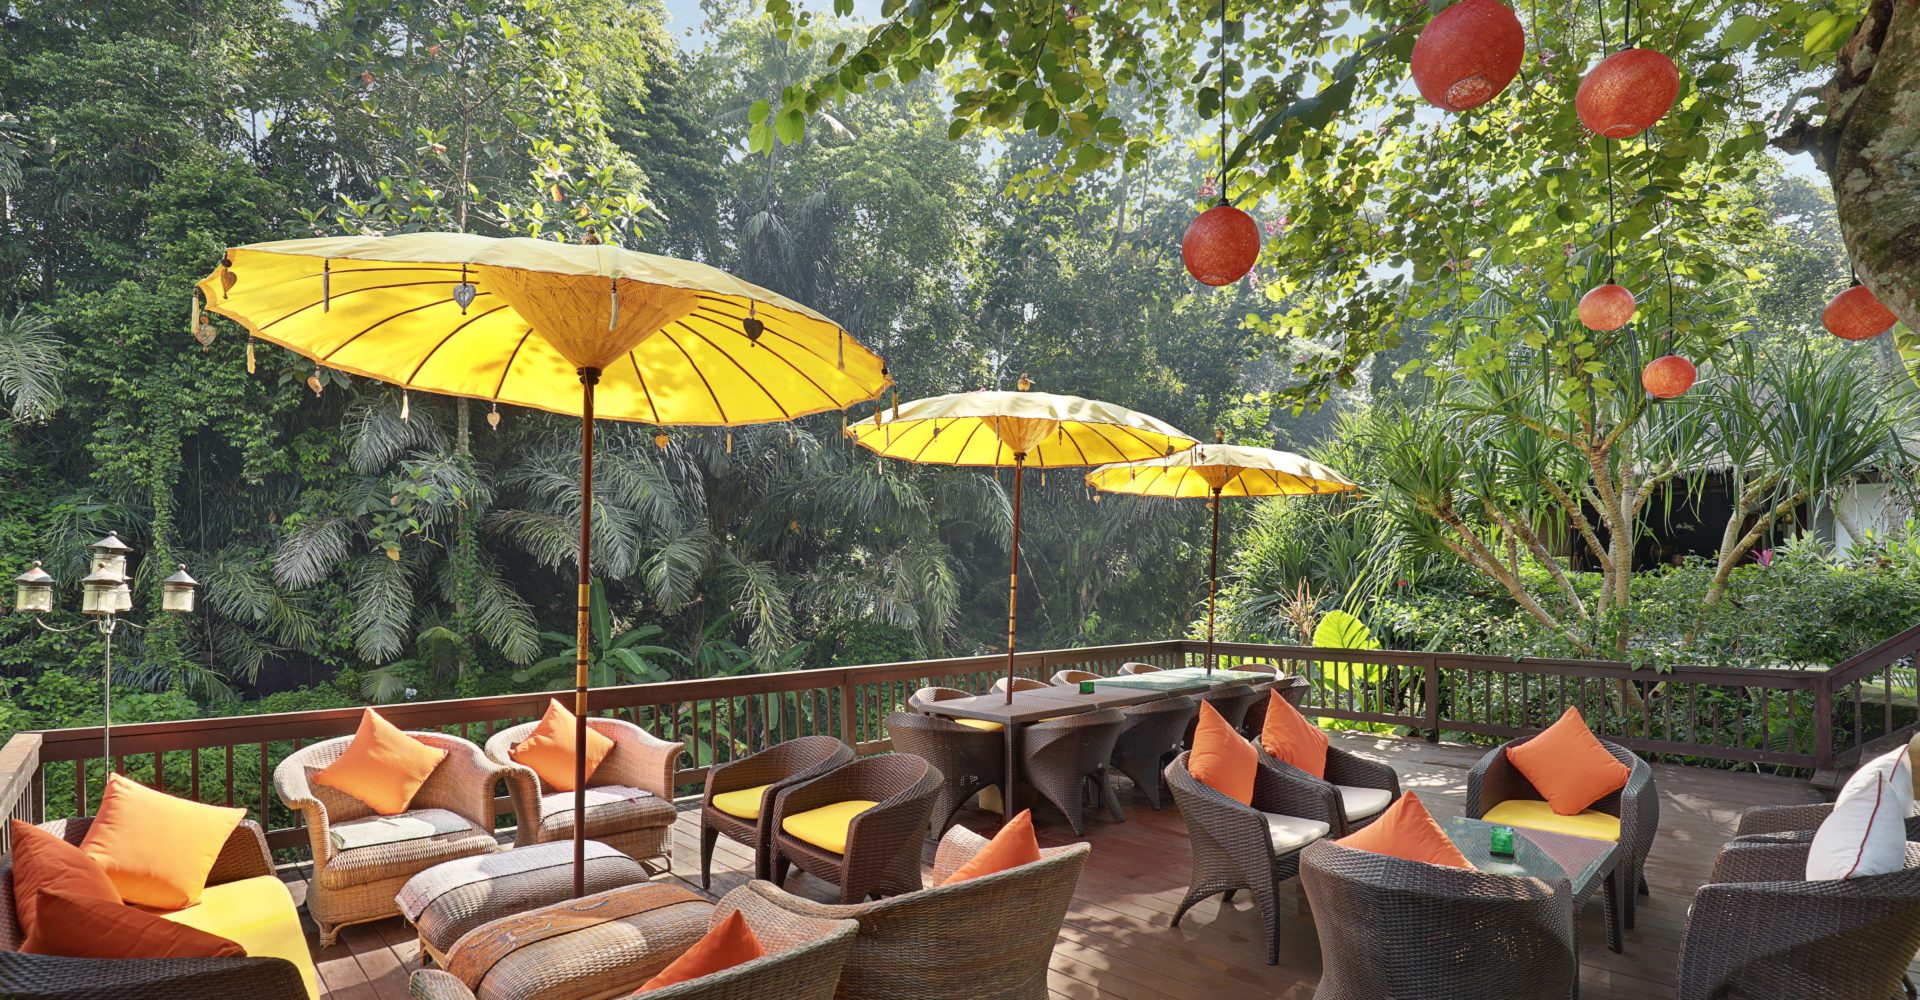 The riverside decking area filled with seats, umbrellas and hanging lanterns.